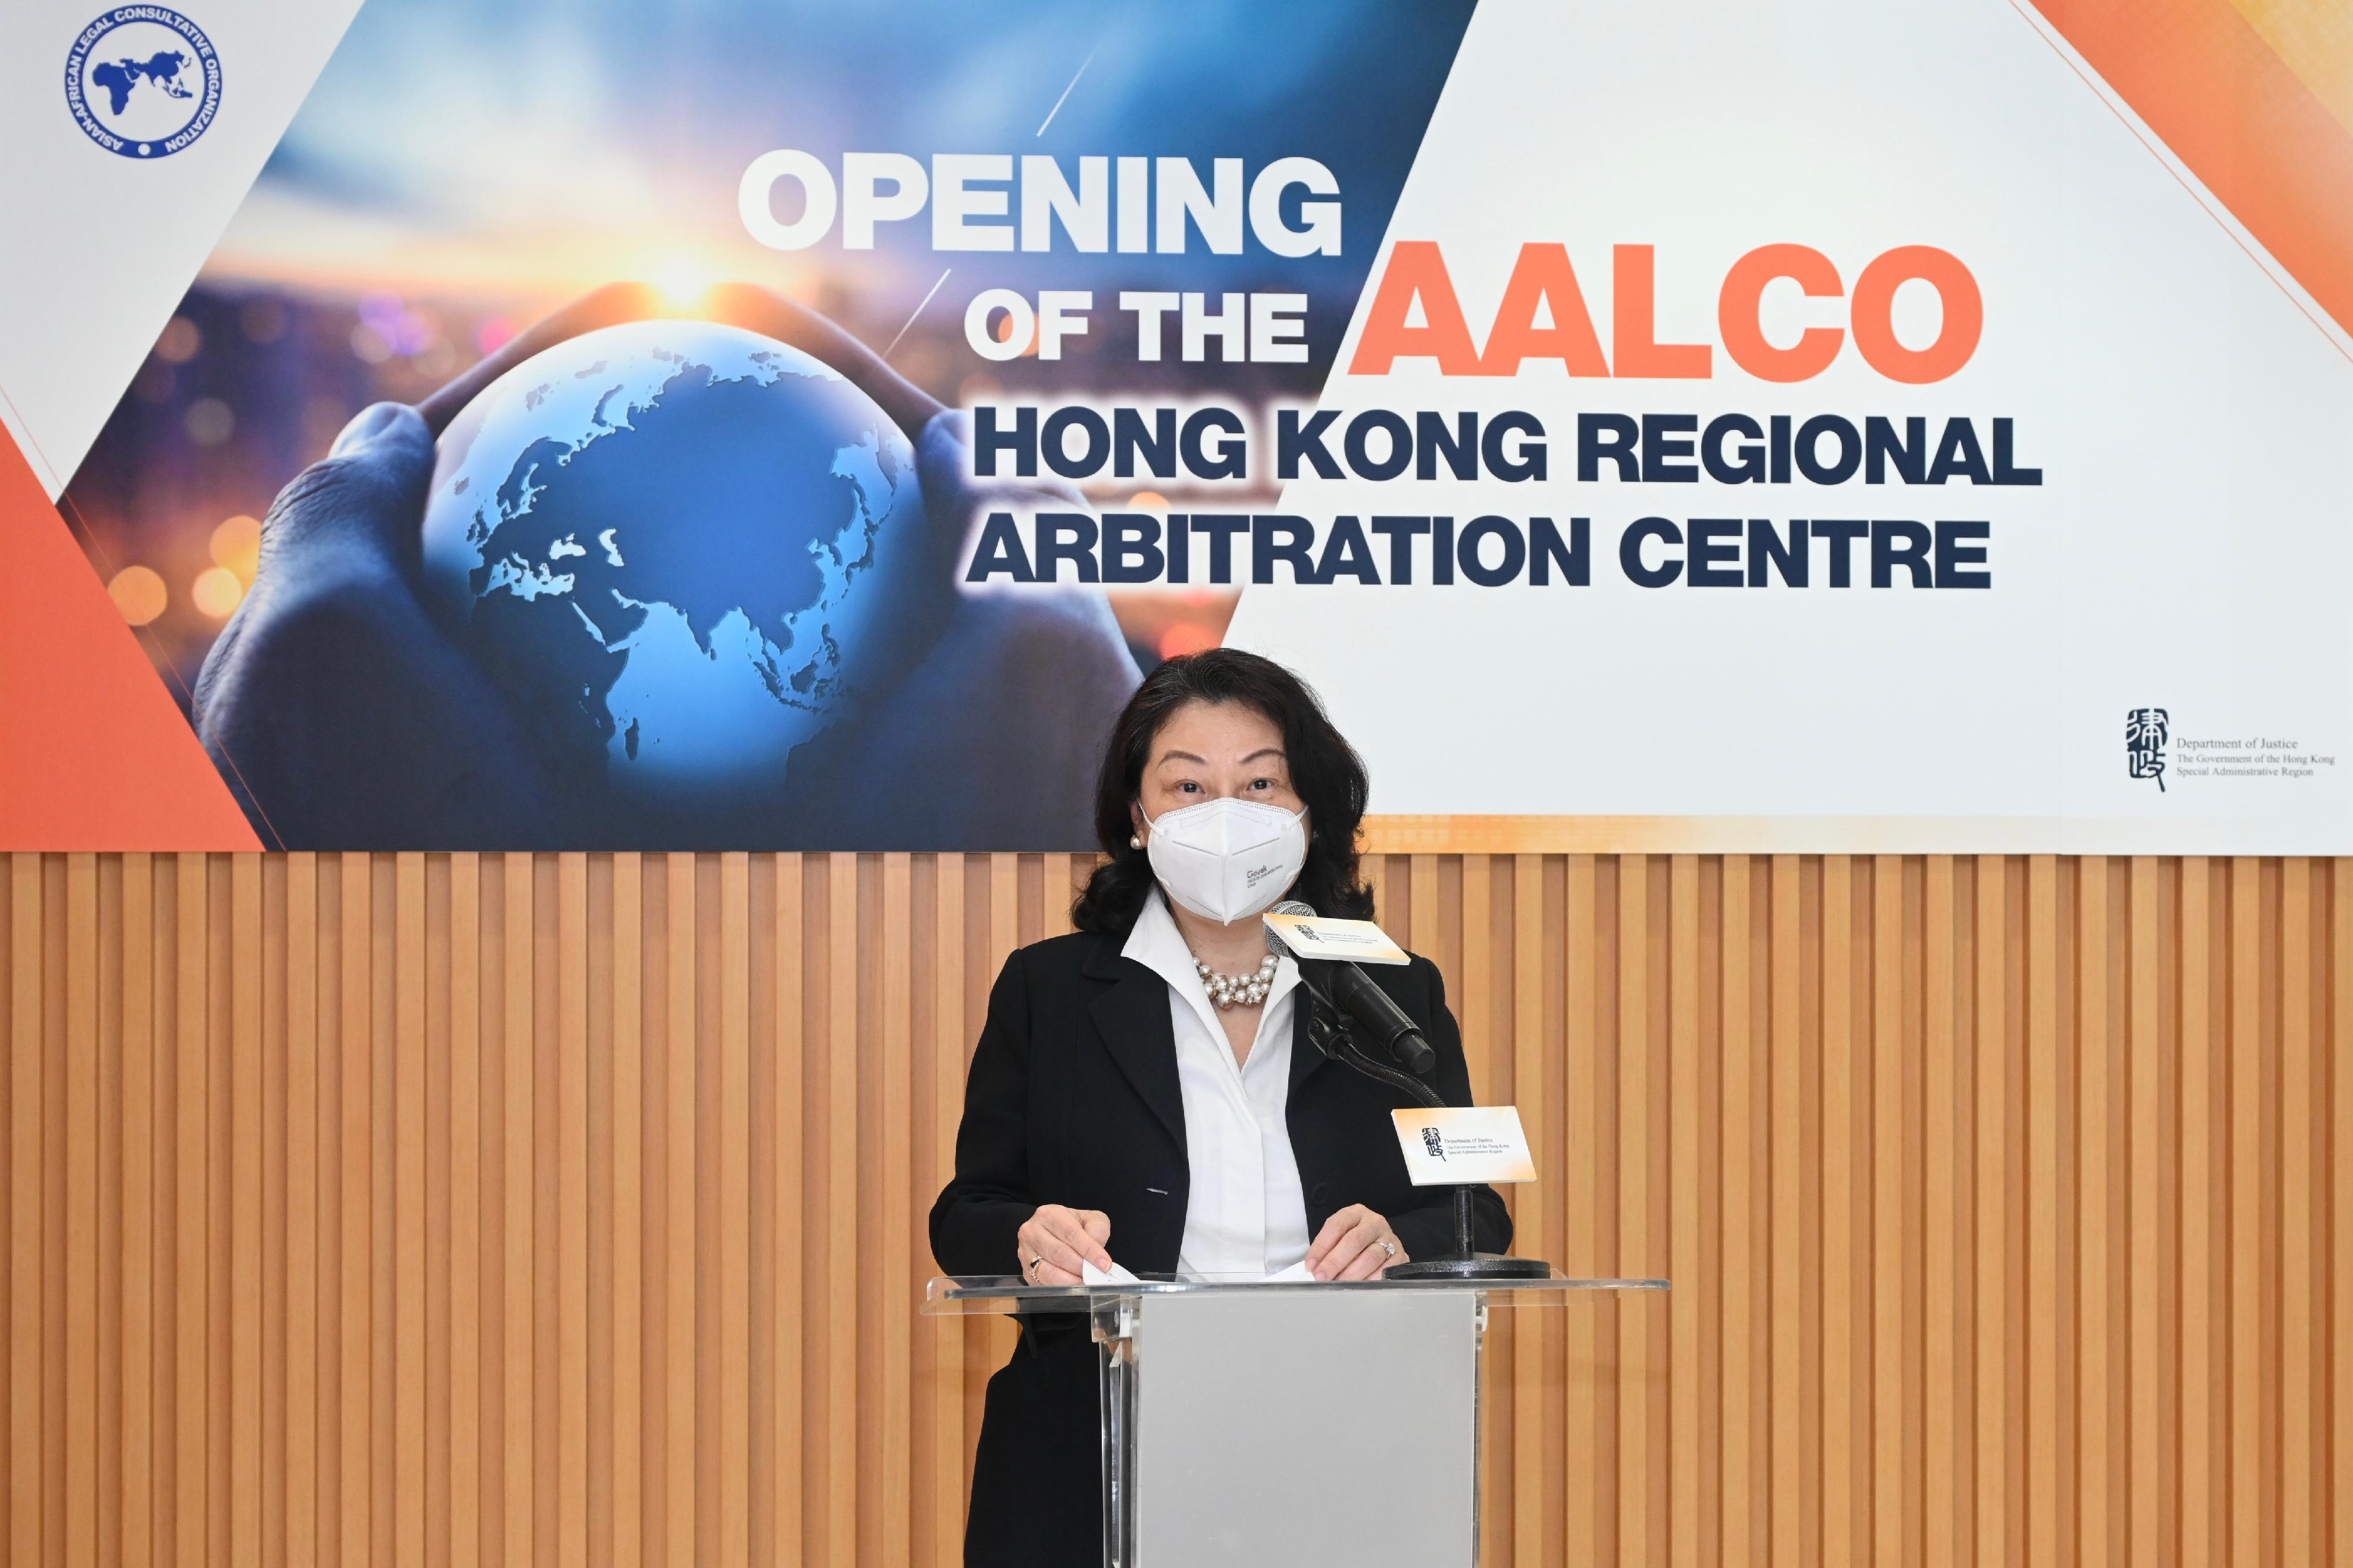 The AALCO Hong Kong Regional Arbitration Centre was officially opened today (May 25). Photo shows the Secretary for Justice, Ms Teresa Cheng, SC, speaking at the opening ceremony.